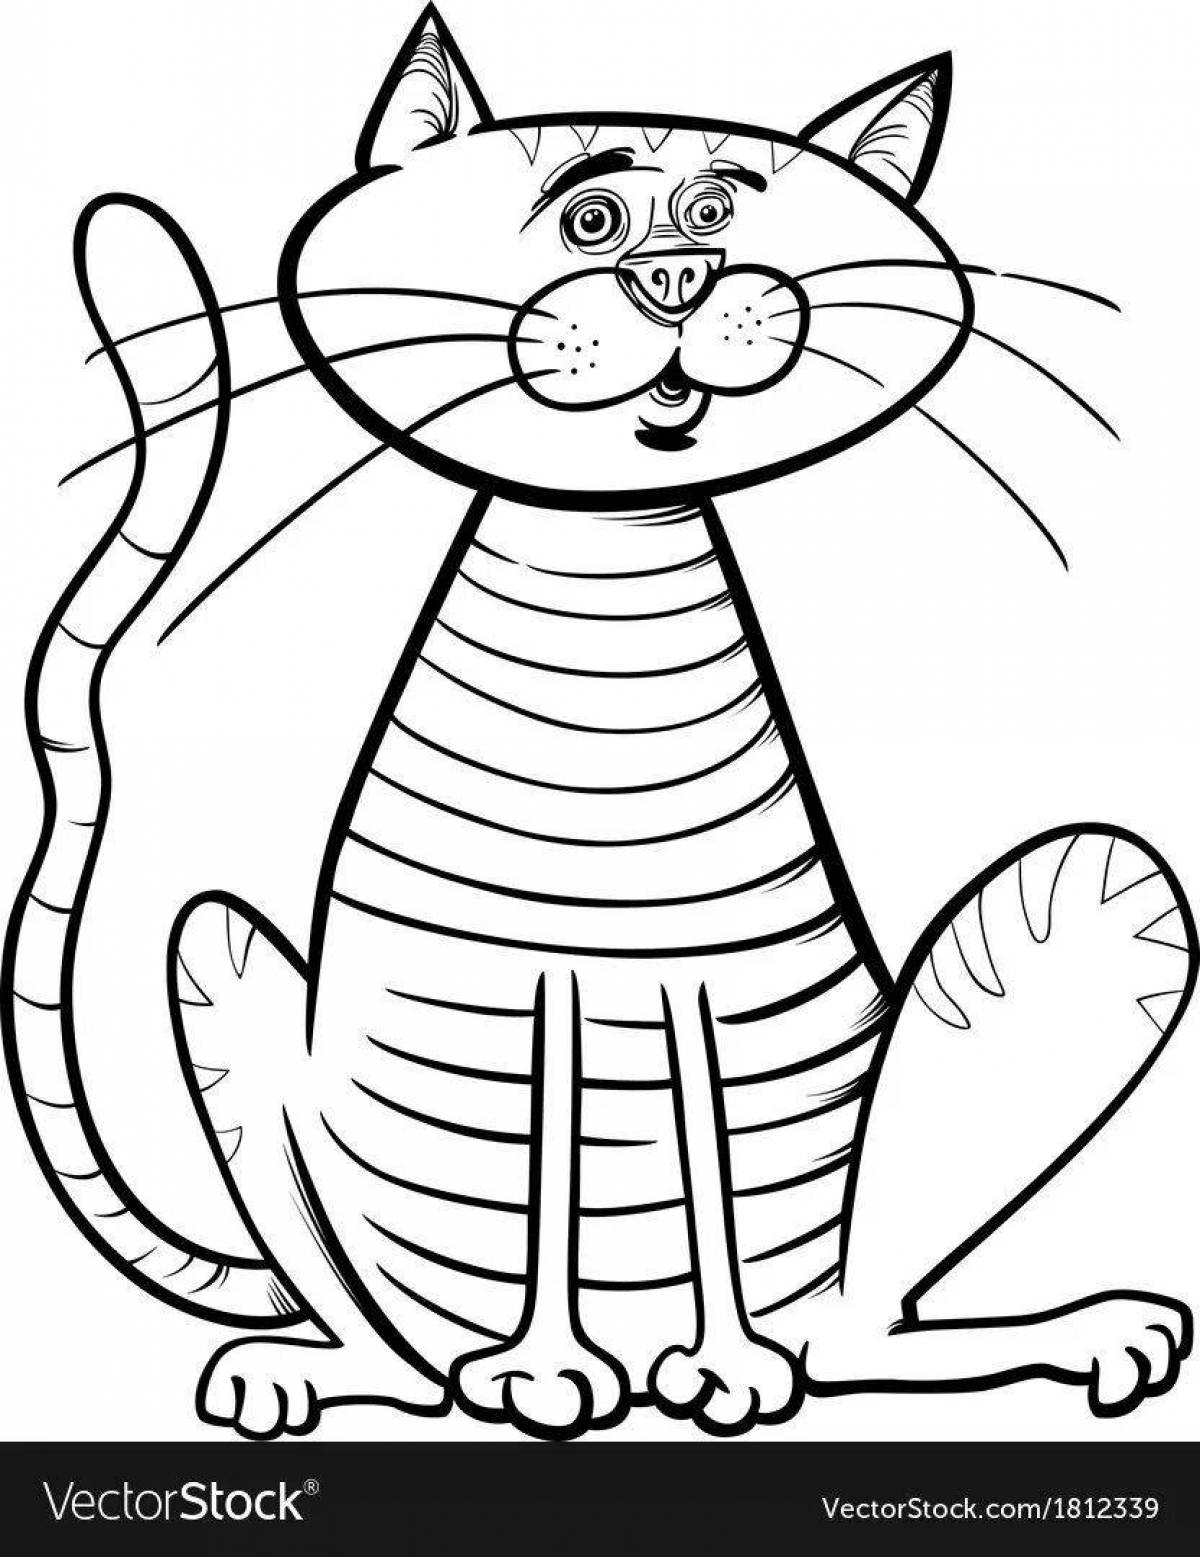 Funny sitting cat coloring book